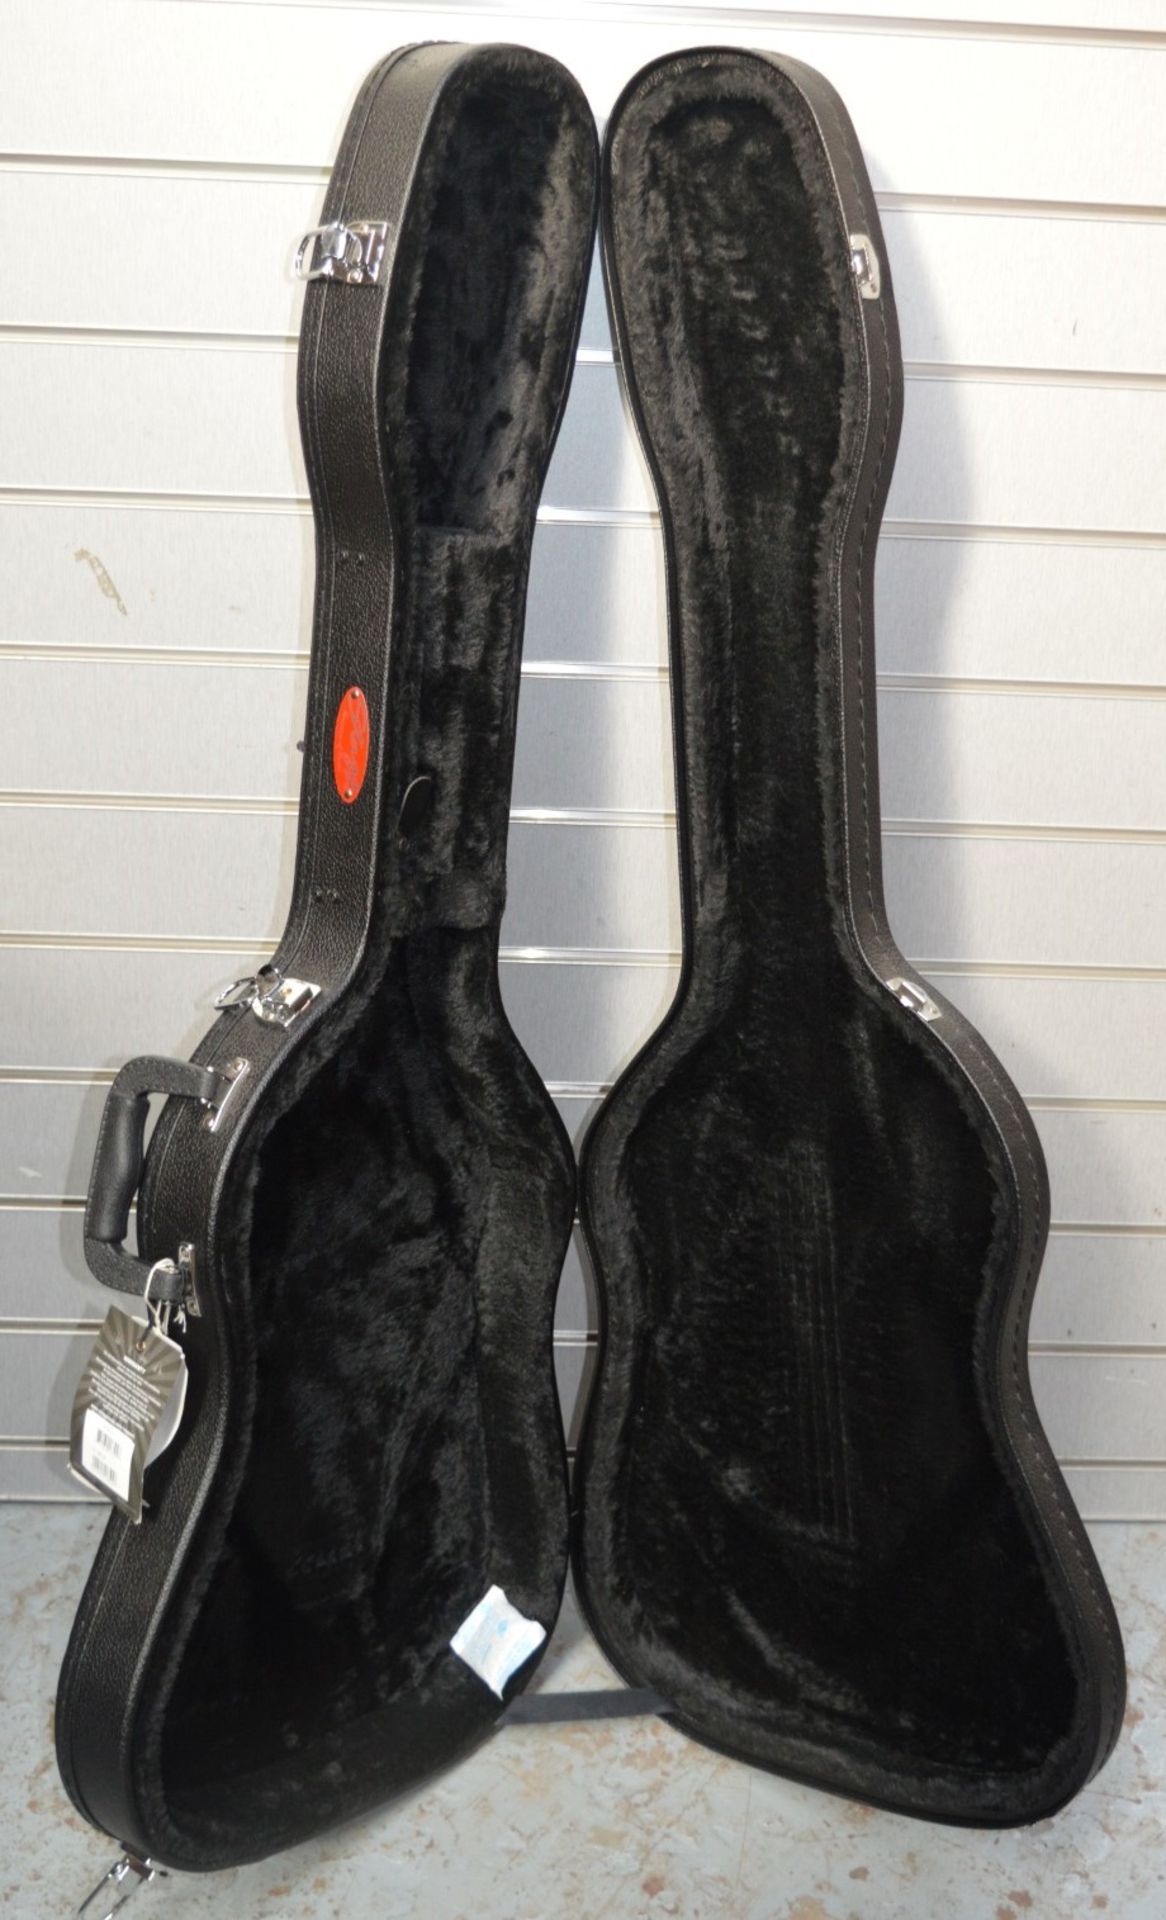 1 x Stagg Basic Electric Hardshell Shaped Guitar Case - CL020 - Ref Pro97 - Location: Altrincham - Image 8 of 8